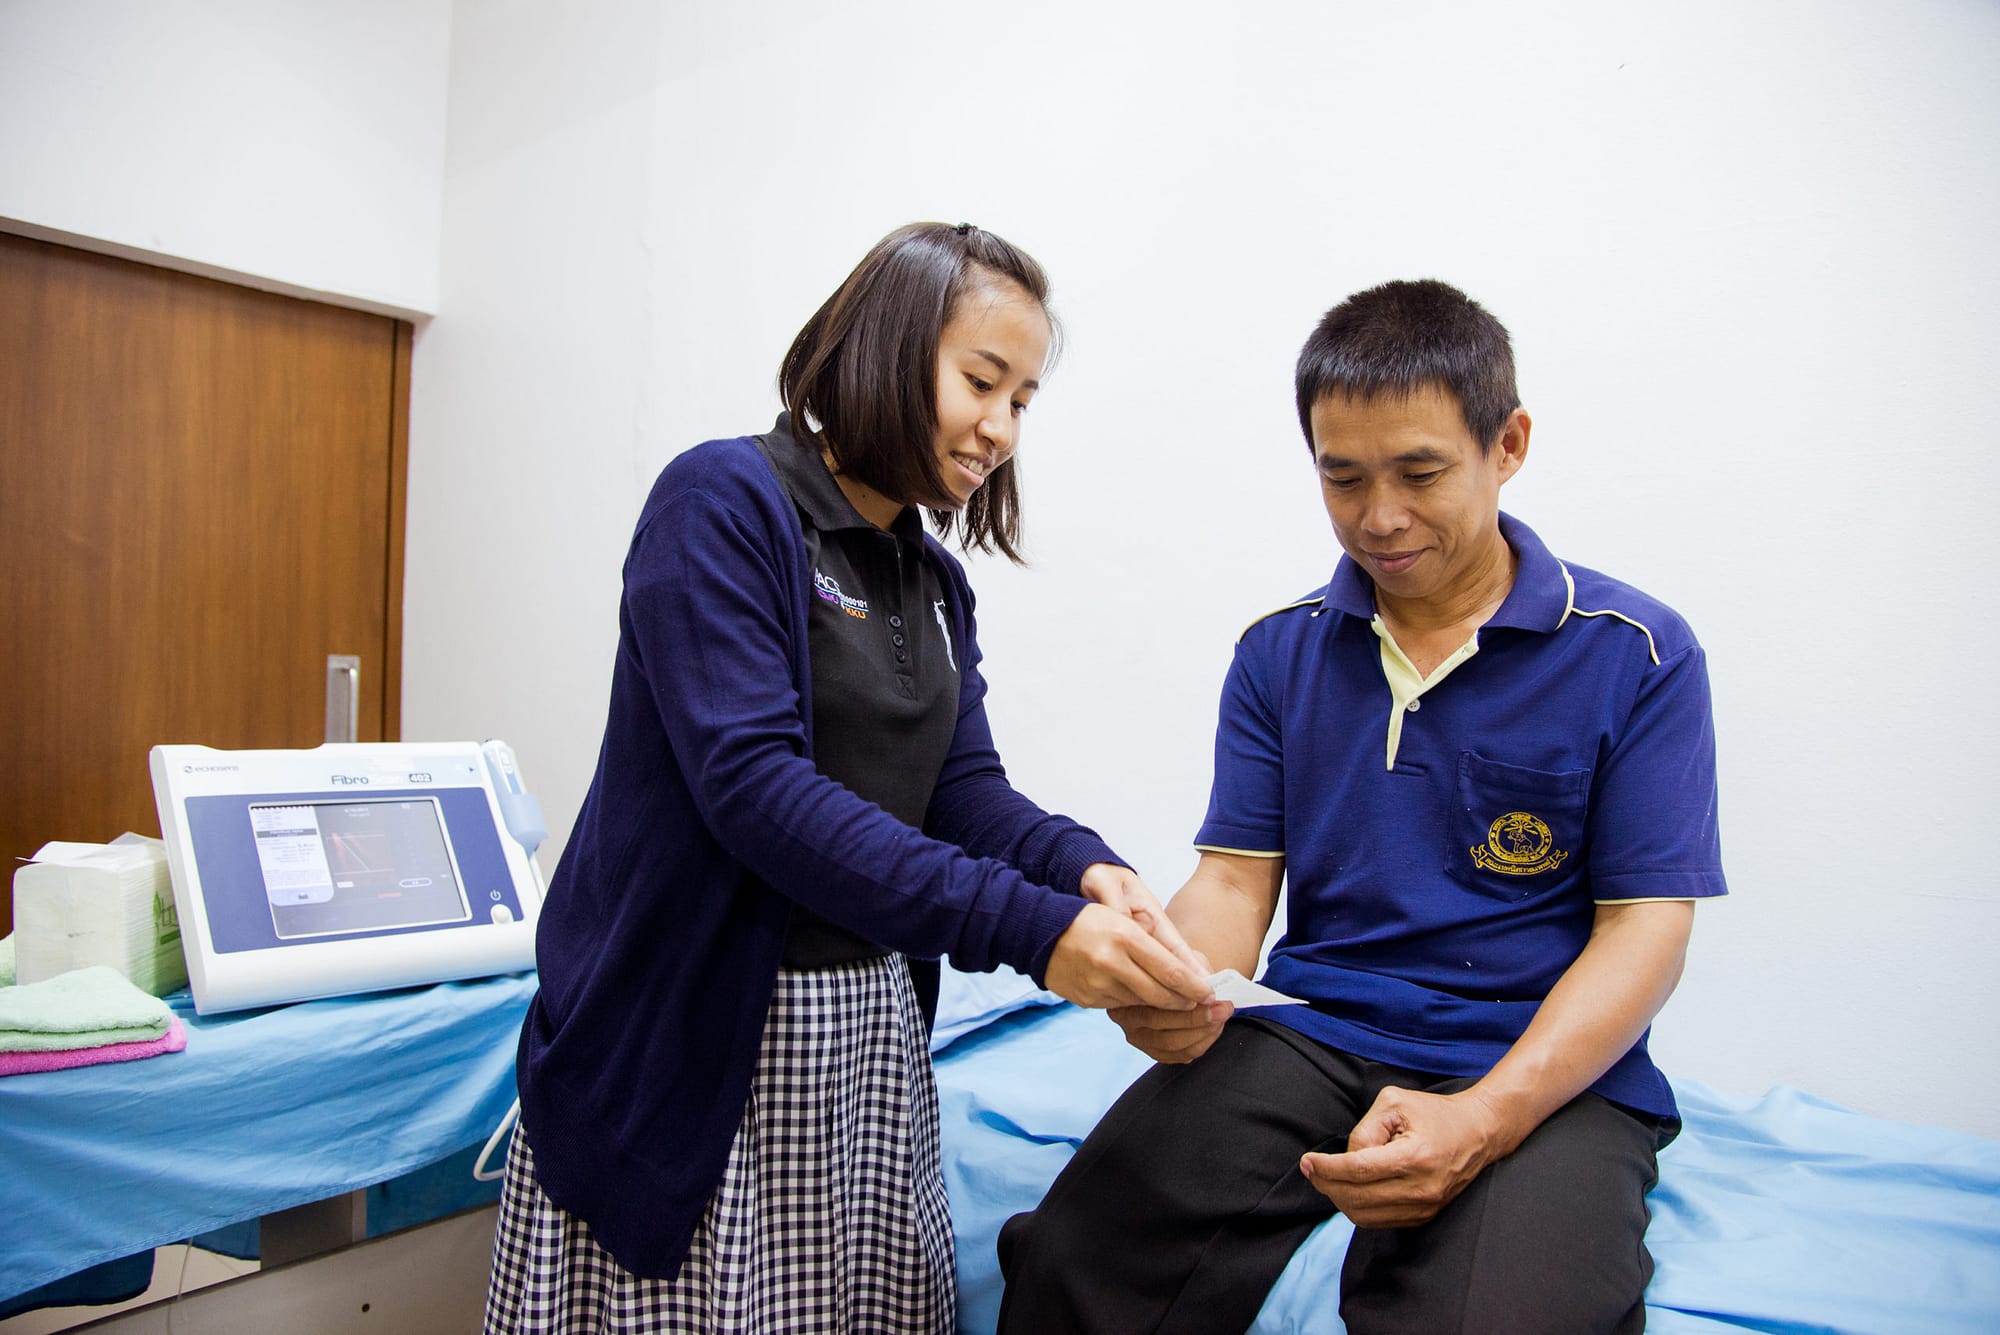 Healthcare worker with a patient in hospital setting